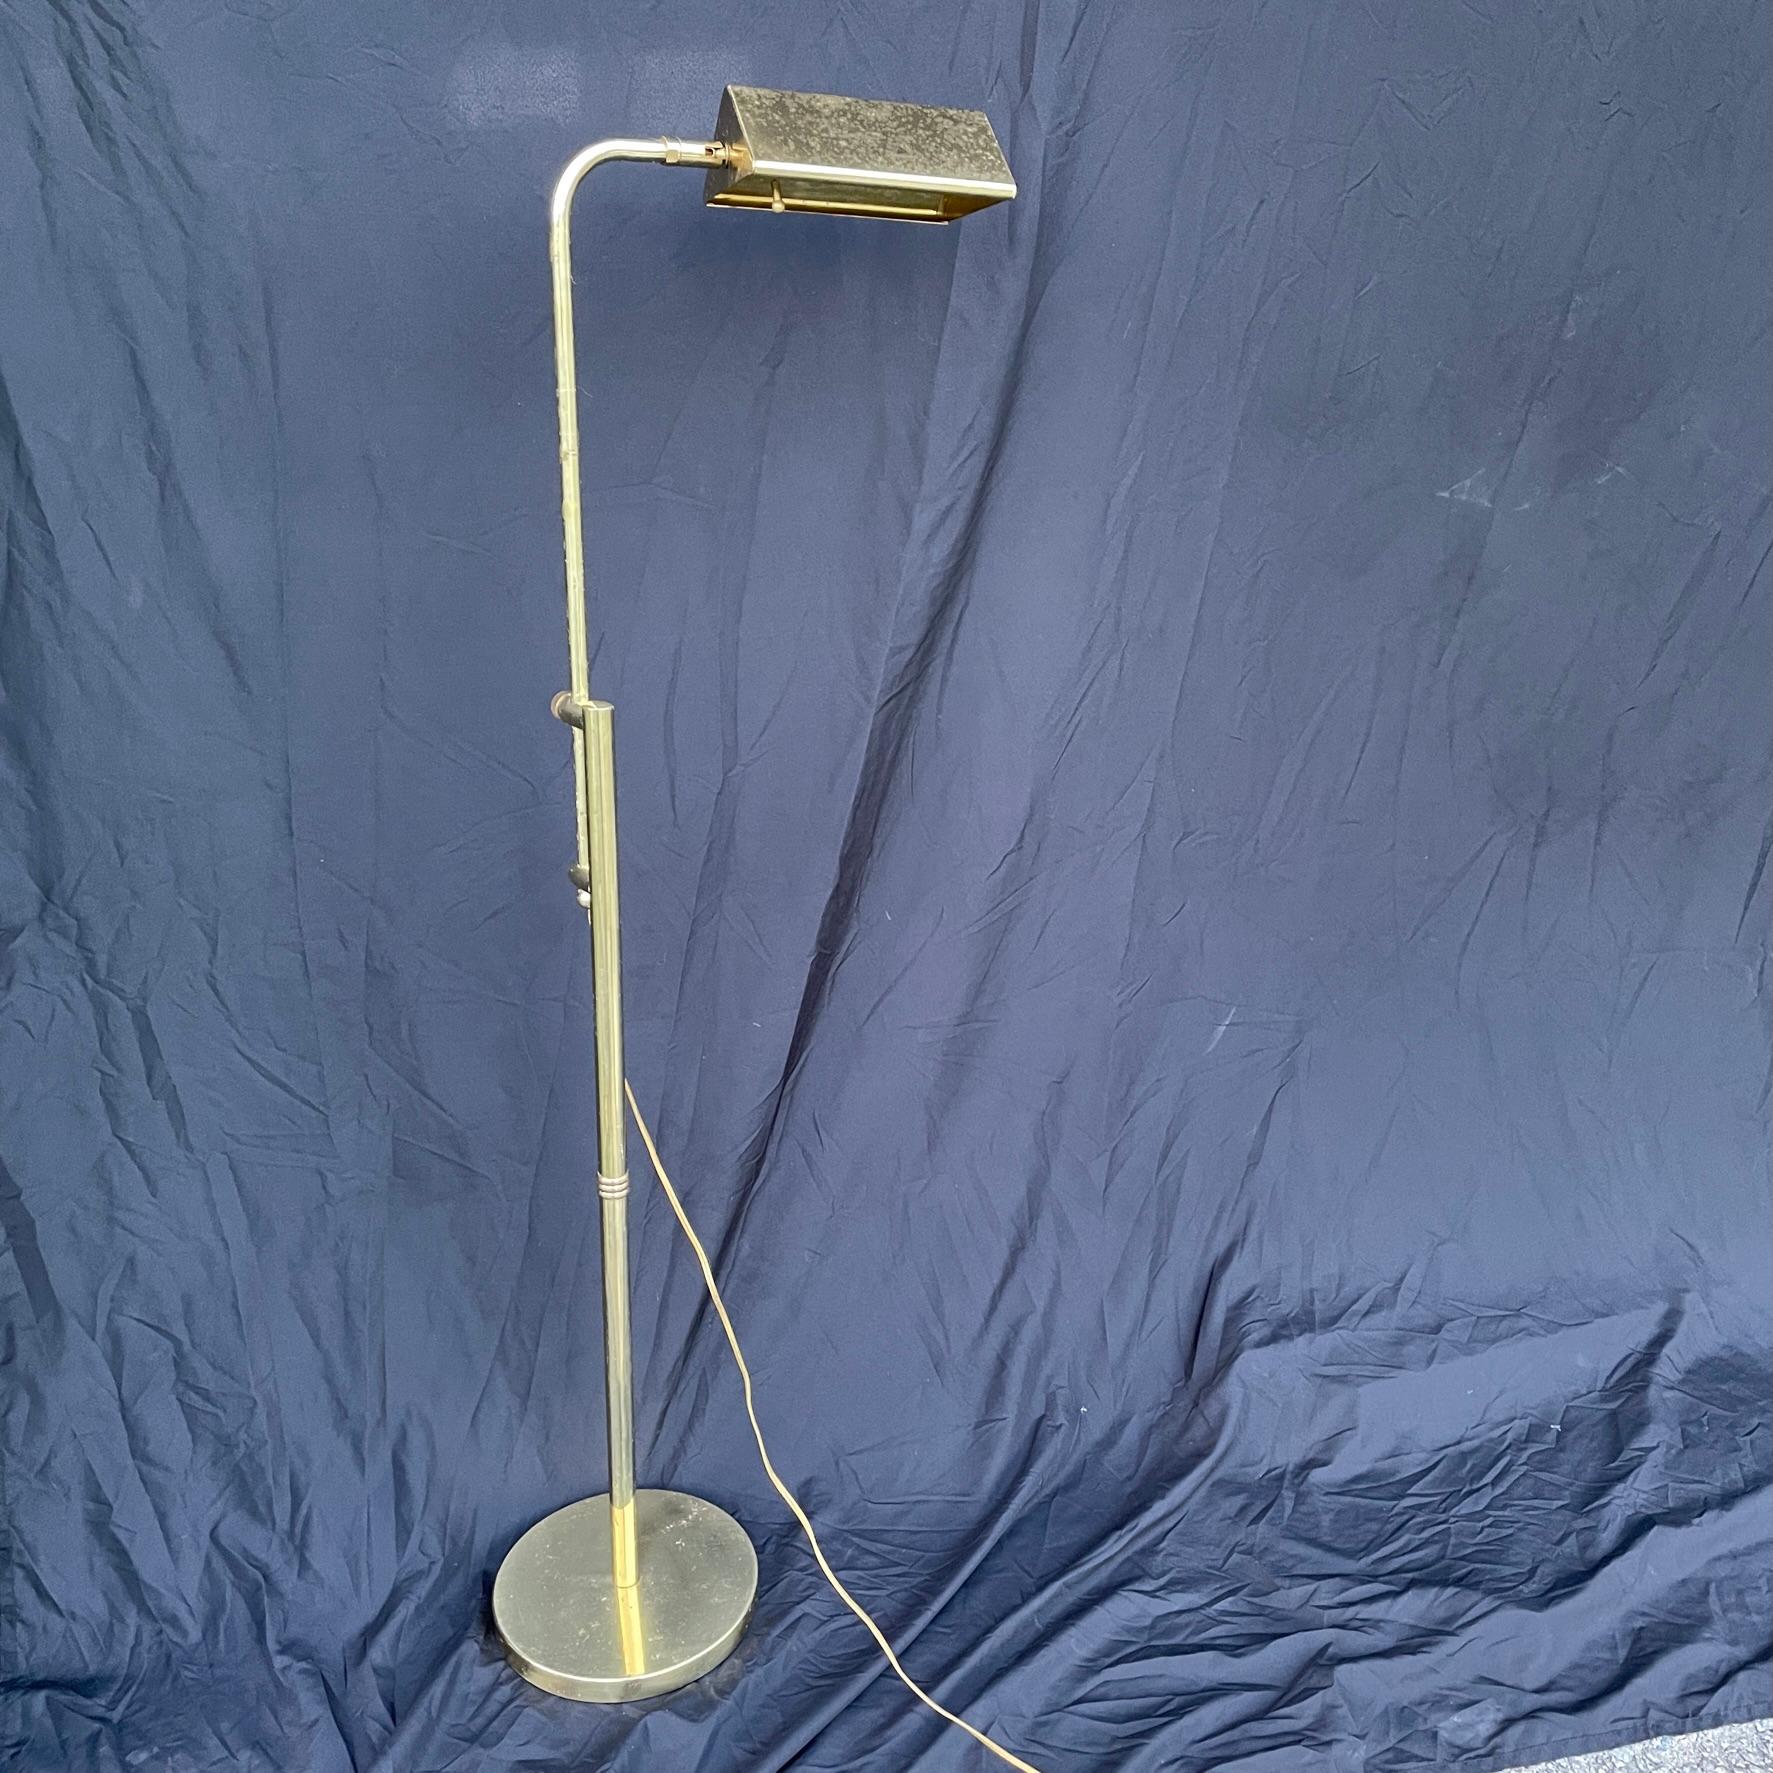 52 1/2 inch height fully extended. Lamp is in working condition. Weighted base. Some spotting on the brass shade. This is photographed. Light articulates in nearly a full circle so you can be sure the lamp will be able to cast light where you need